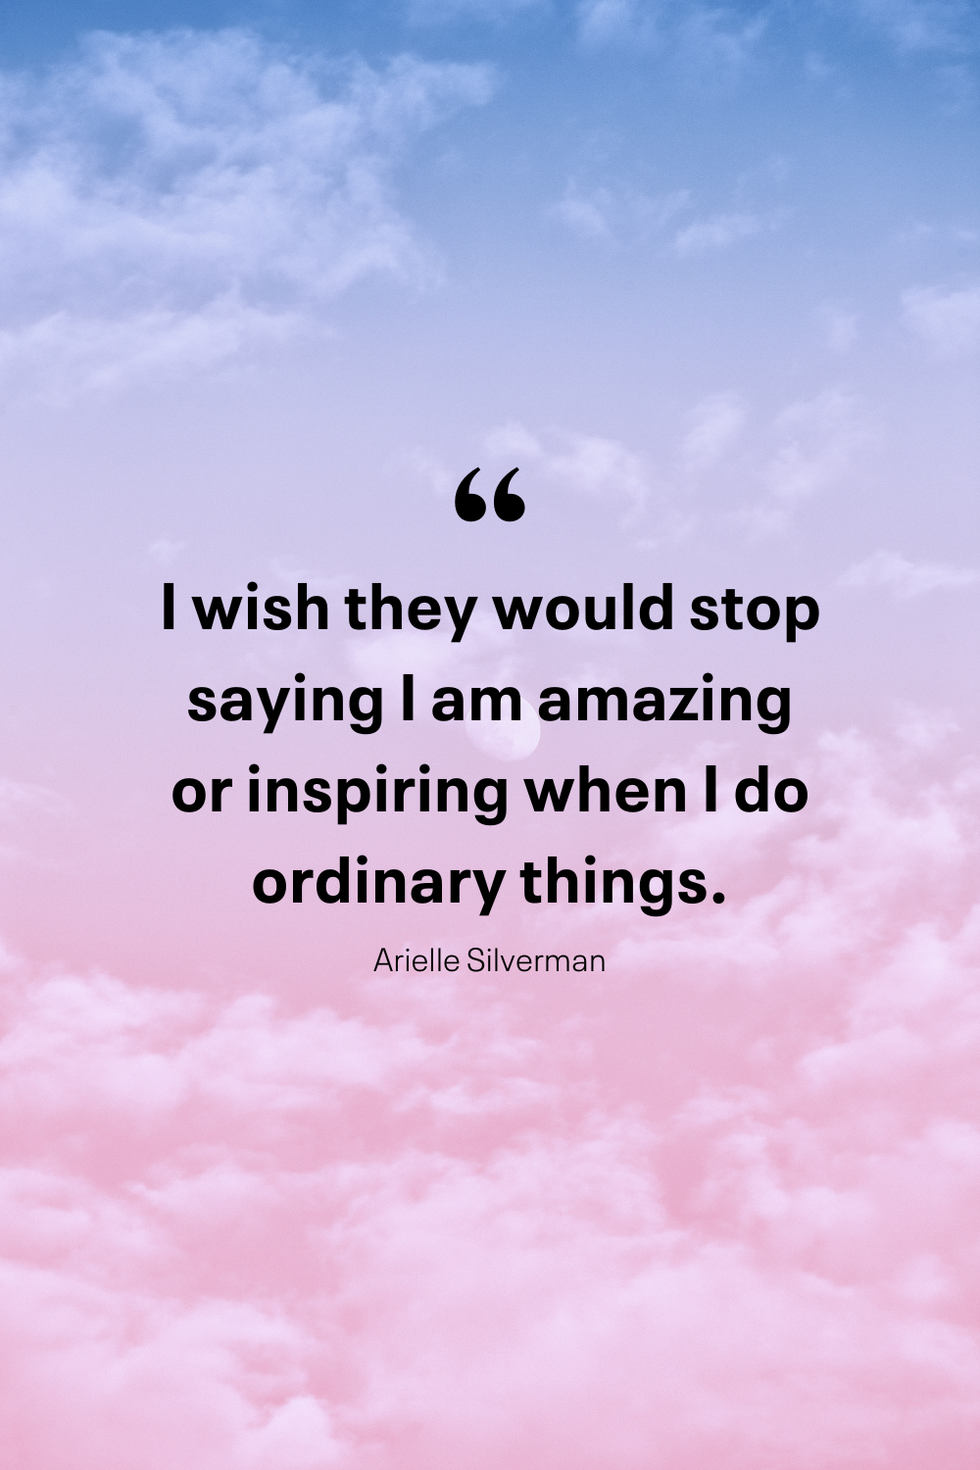 i wish they would stop saying i am amazing or inspiring when i do ordinary things, arielle silverman